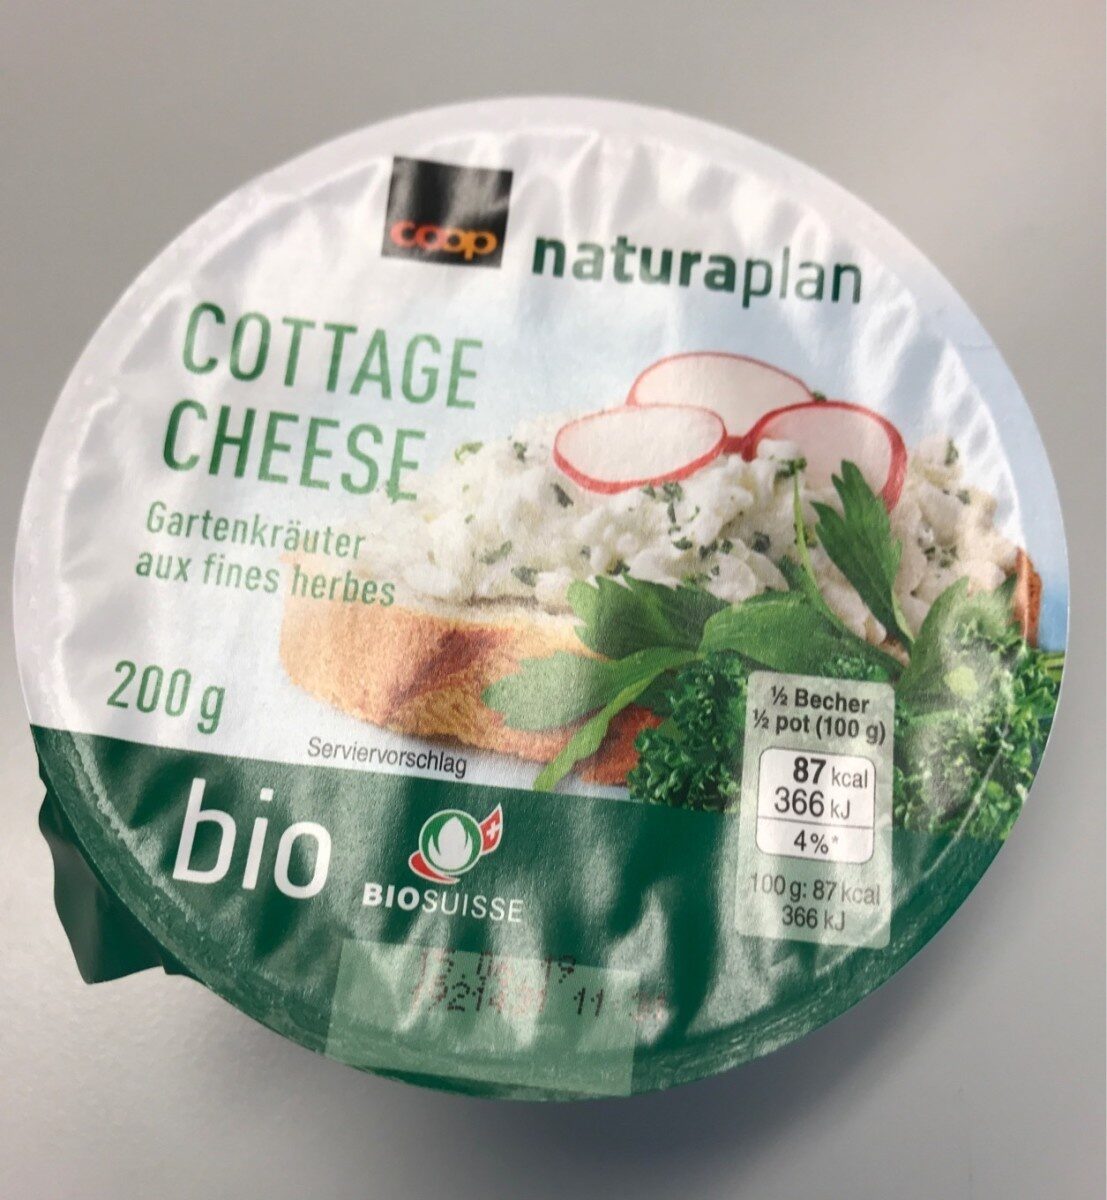 Cottage cheese aux fines herbes - Producto - fr